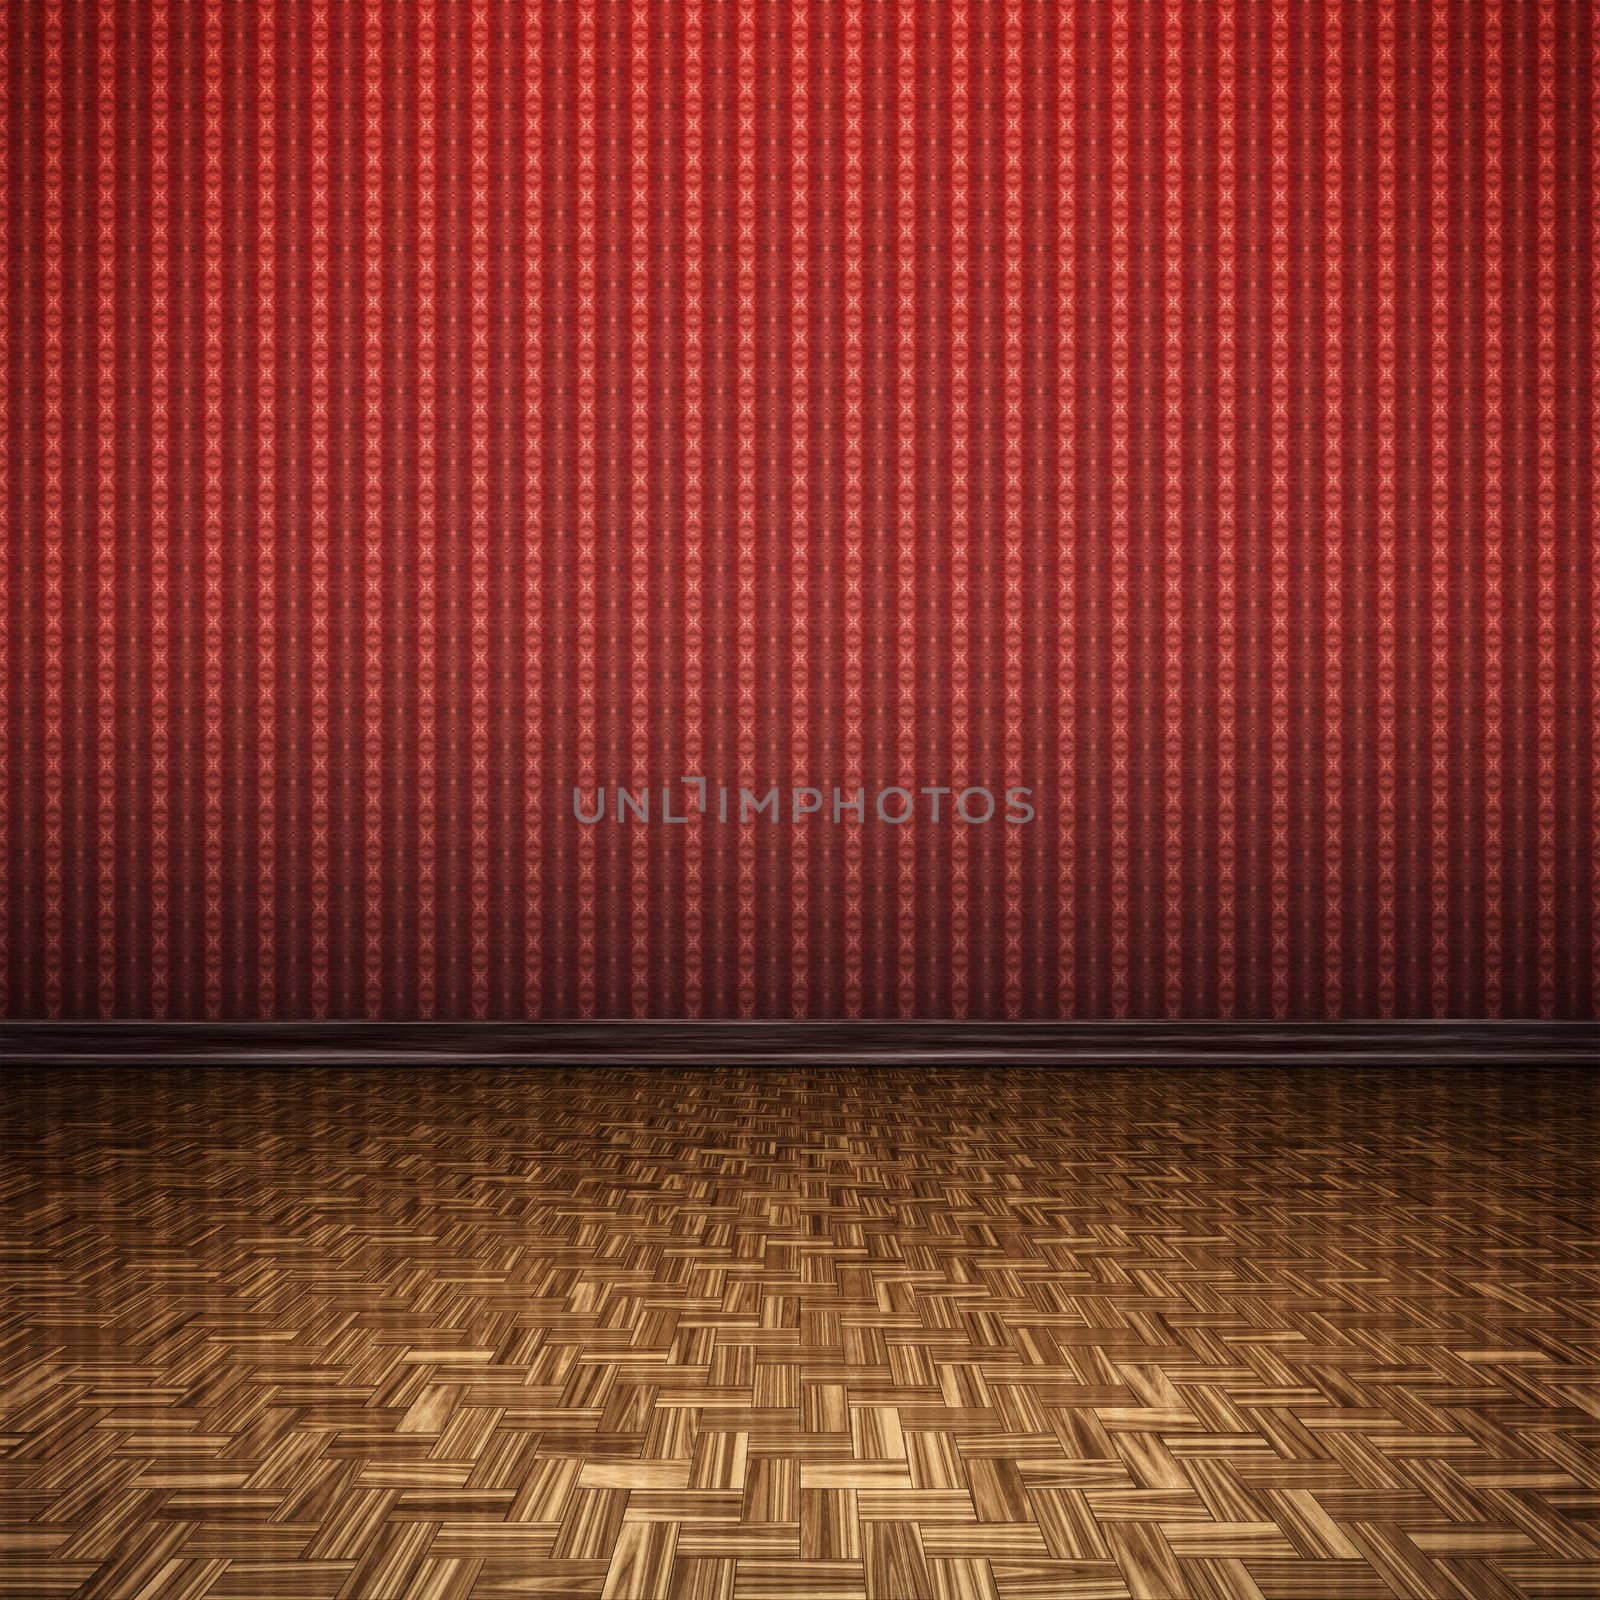 An image of a nice red floor for your content